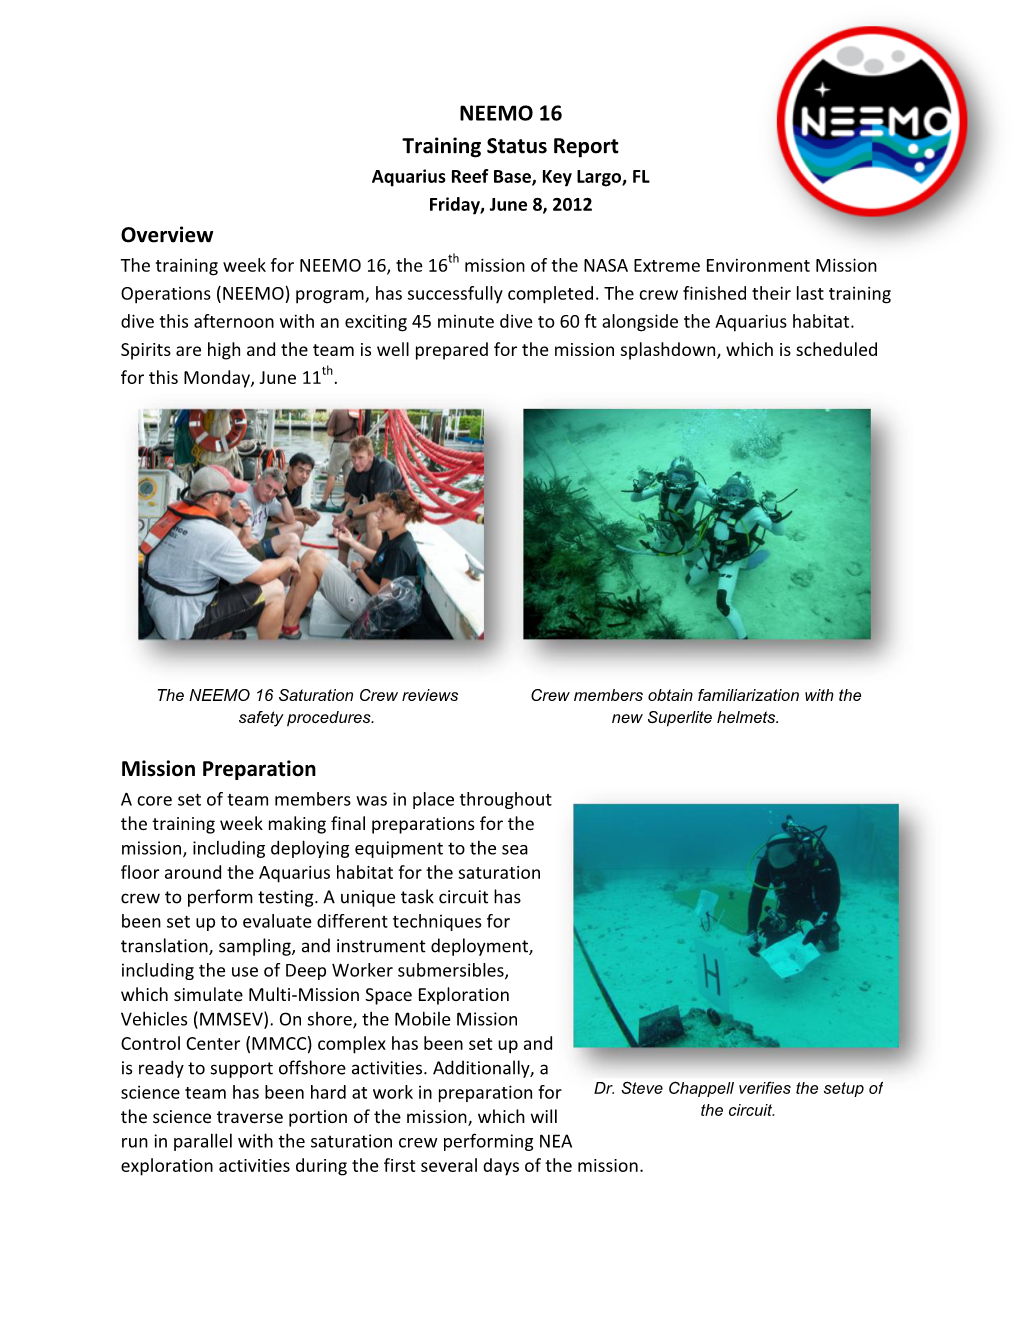 NEEMO 16 Training Status Report Overview Mission Preparation